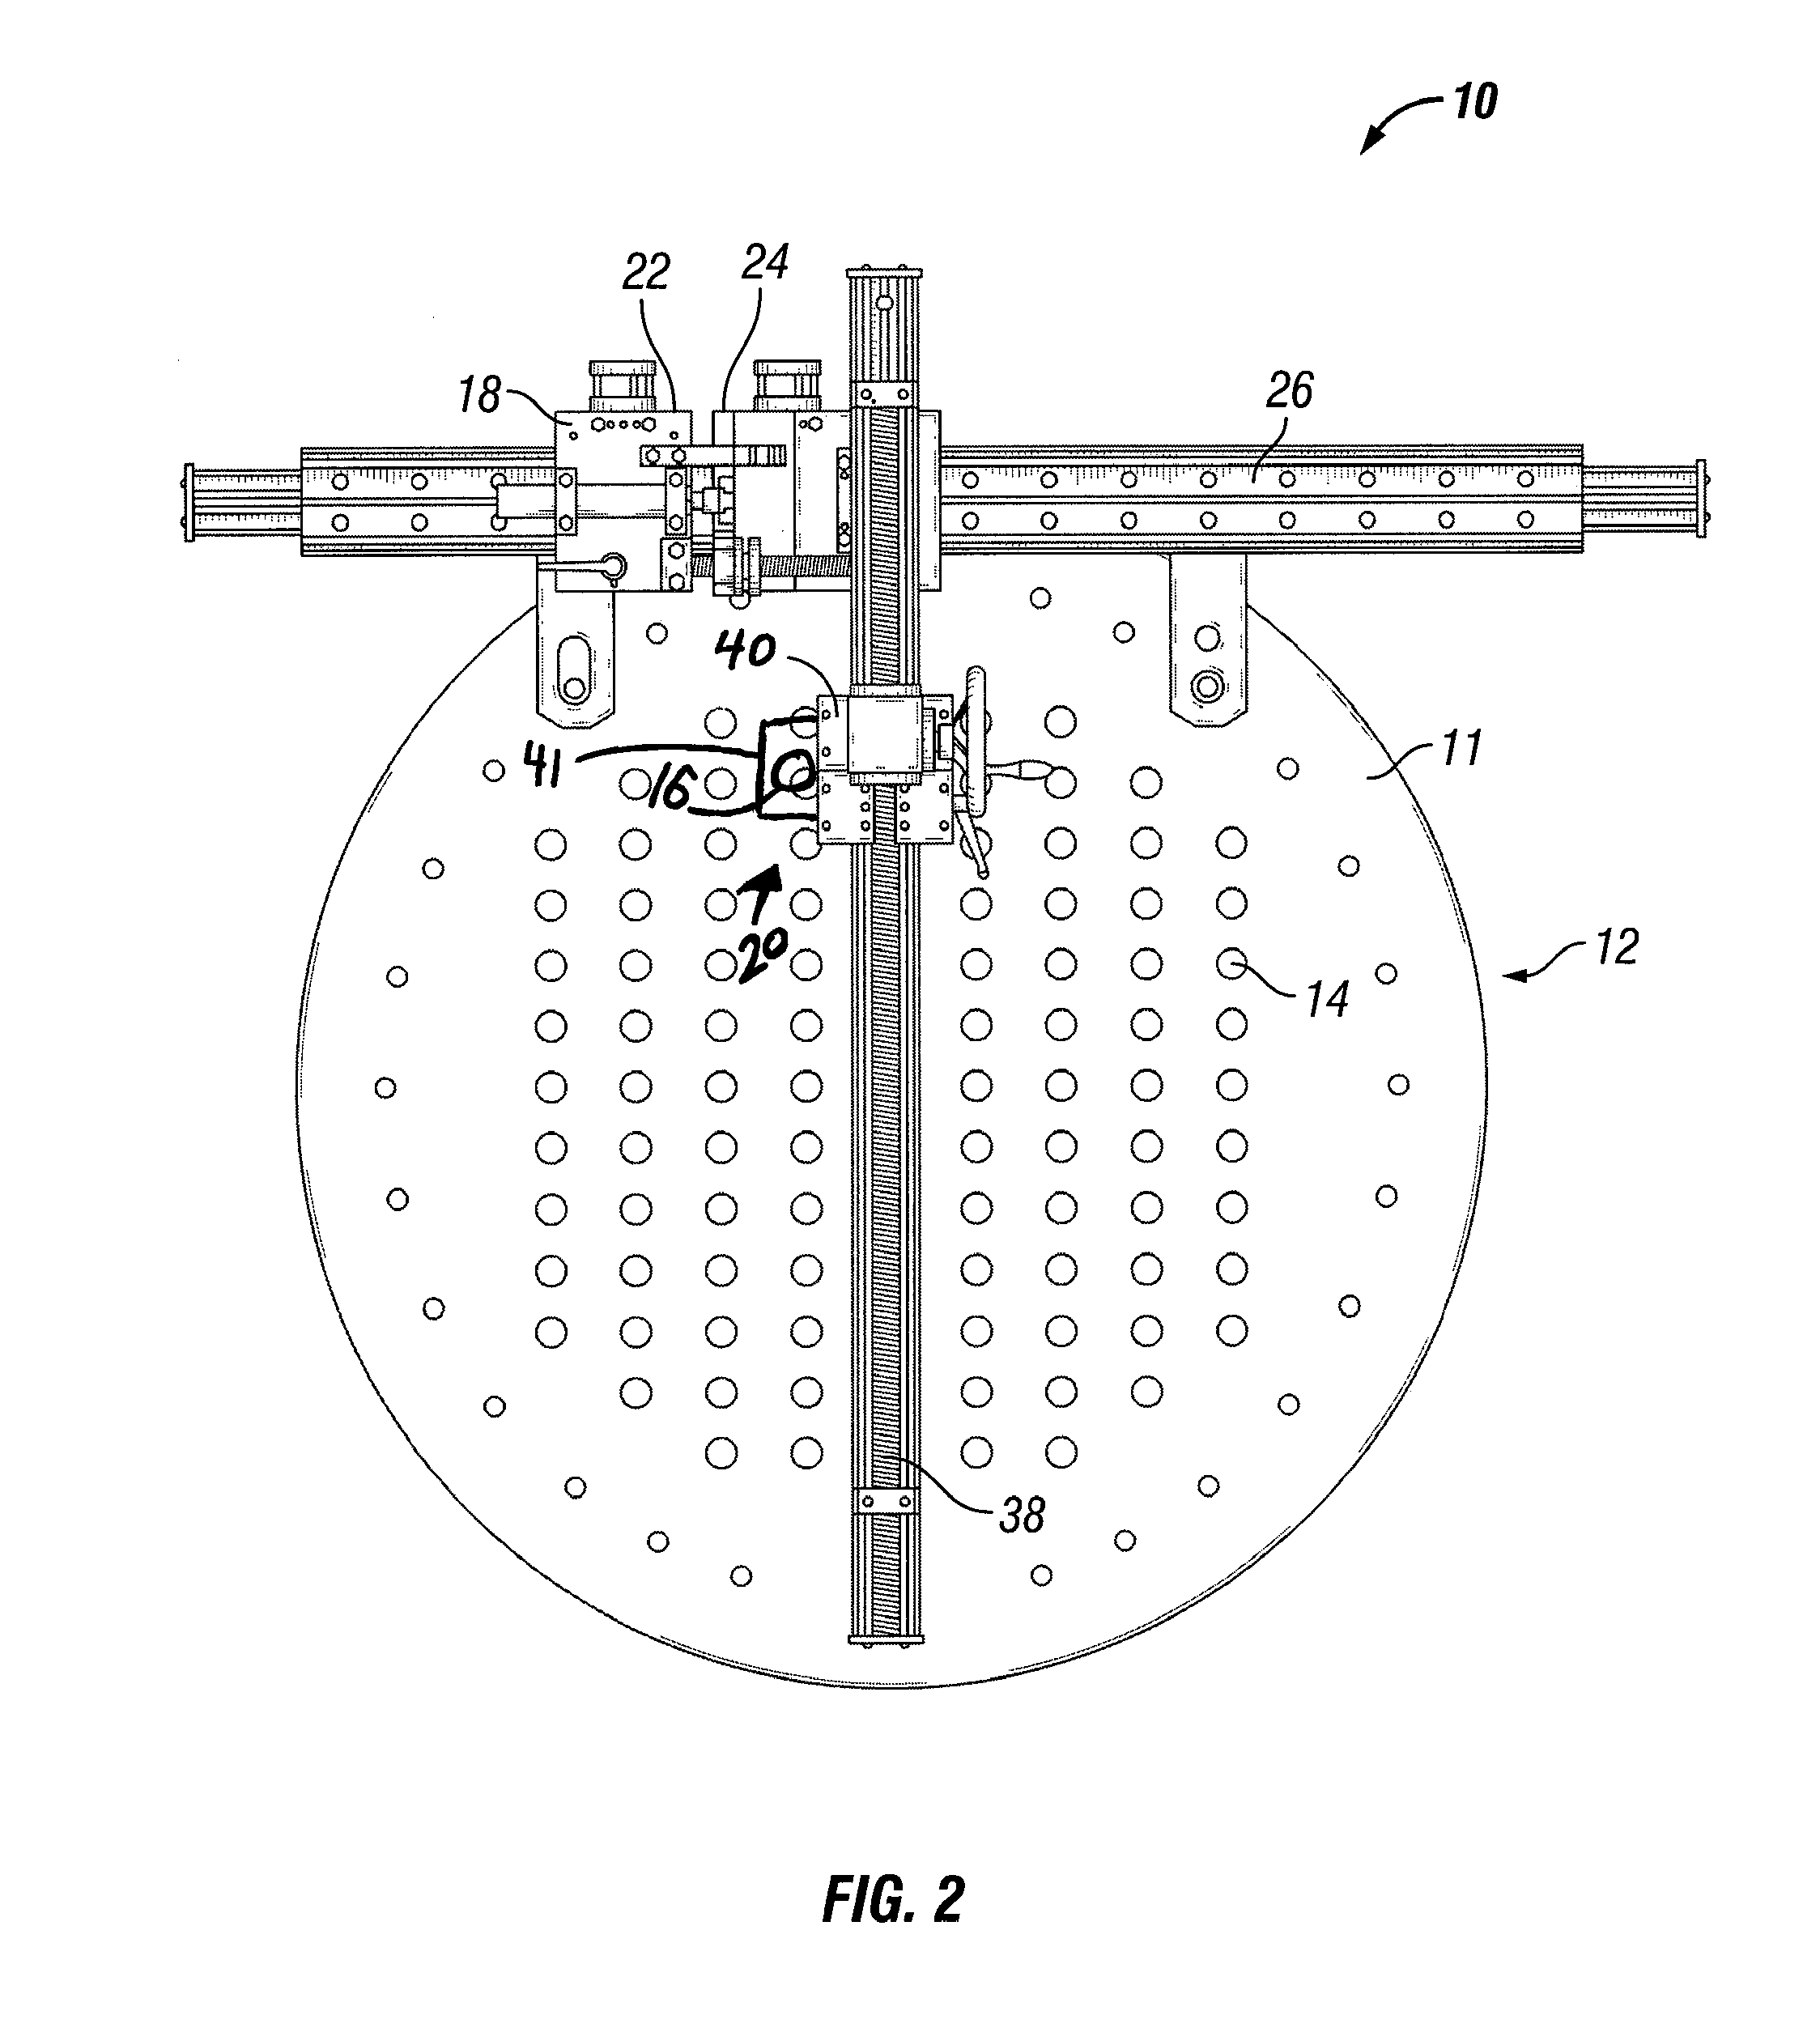 Semi-automated heat exchanger tube cleaning assembly and method